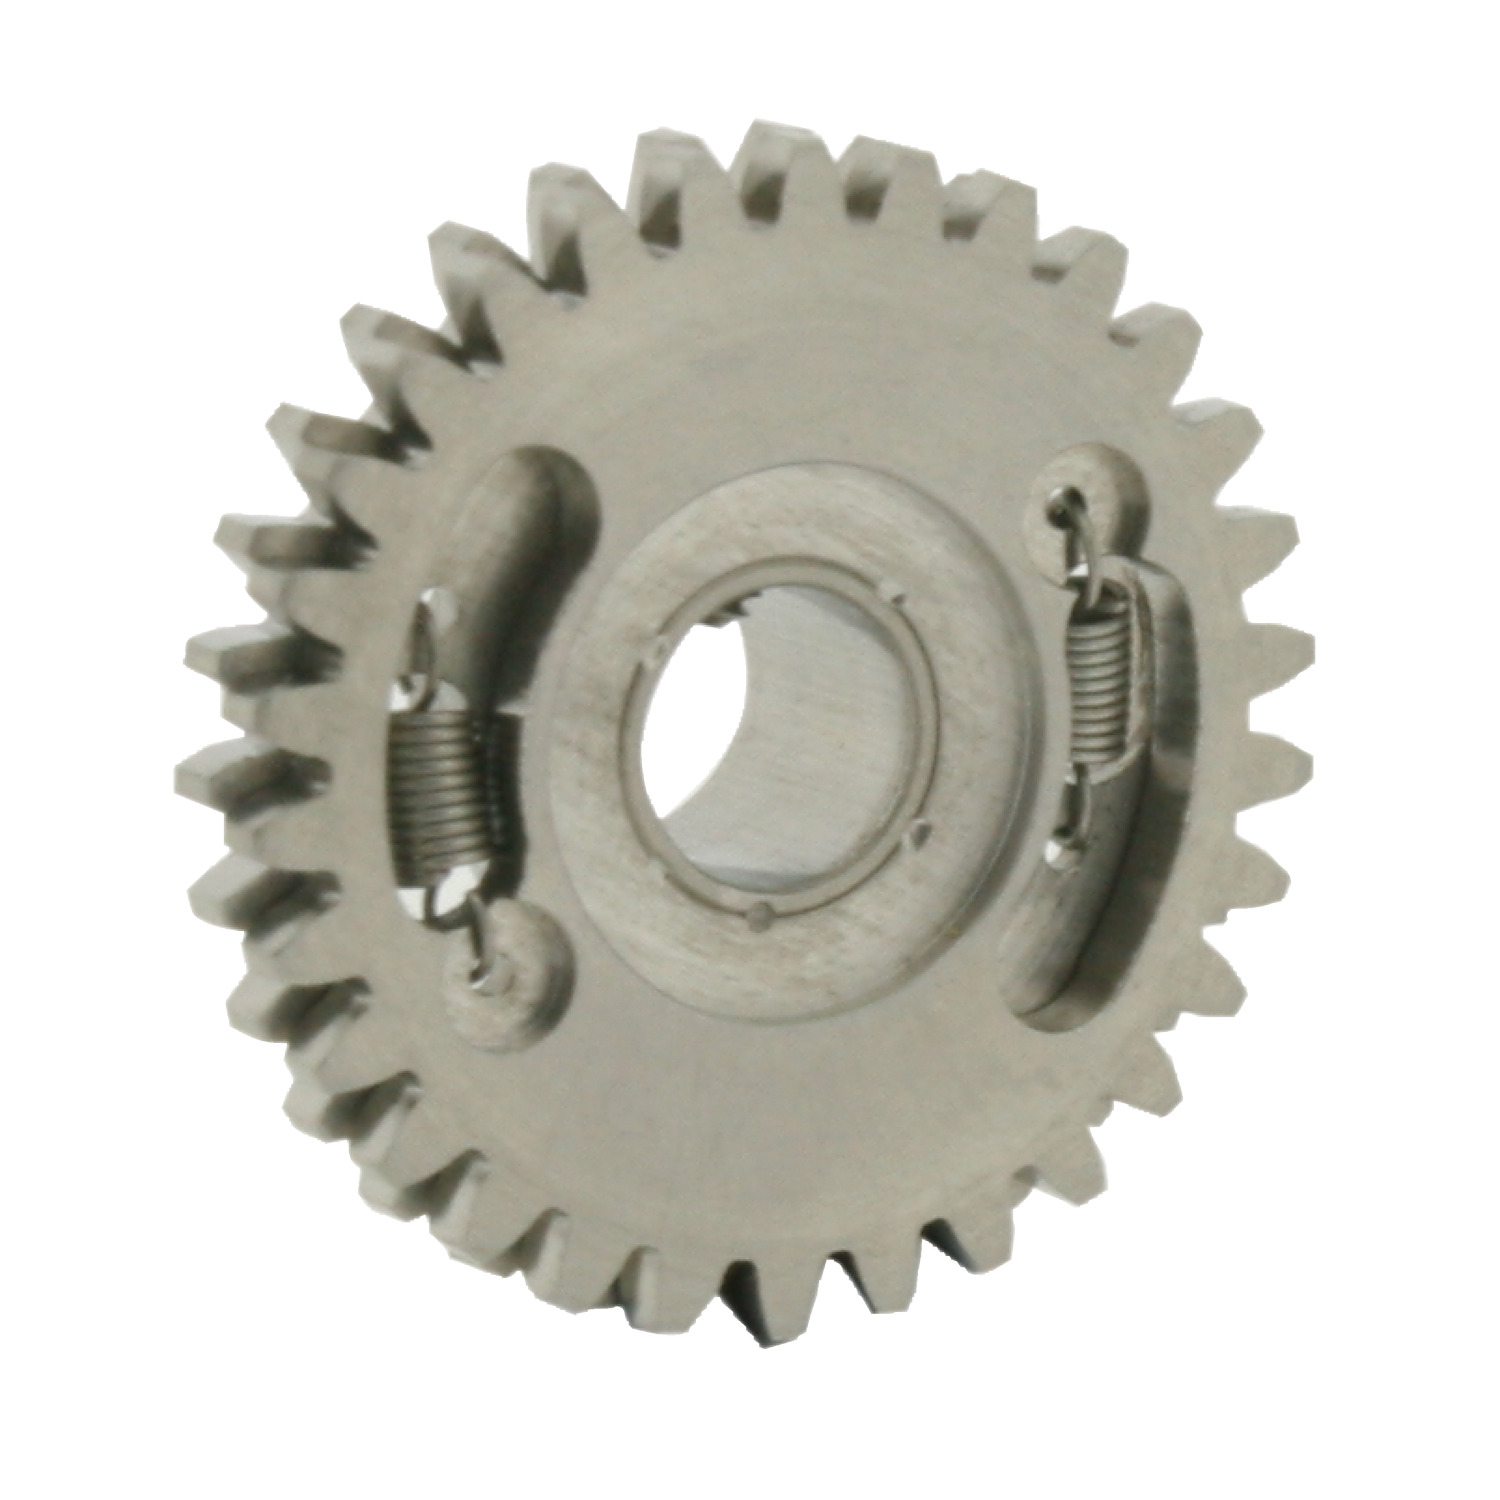 R2088 - Hubless Spur Gears